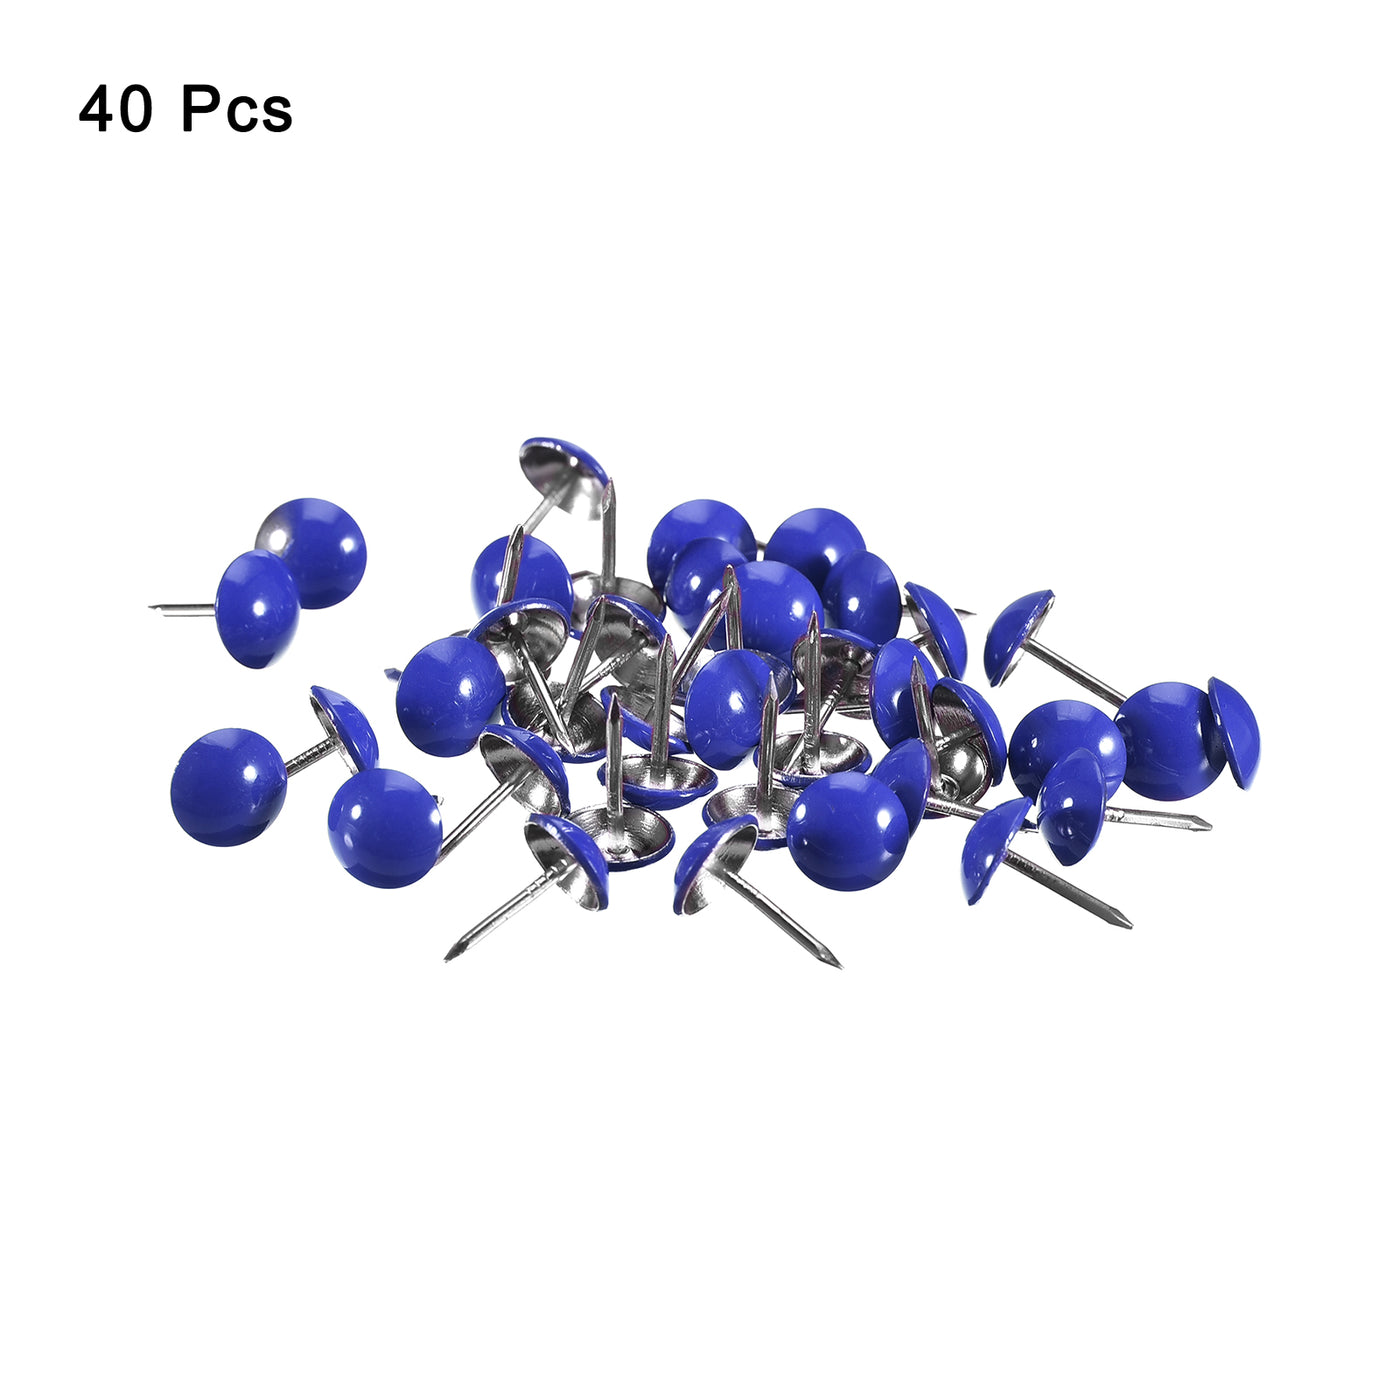 uxcell Uxcell 40Pcs 11mmx17mm Round Decorative Upholstery Tacks Furniture Nails, Blue